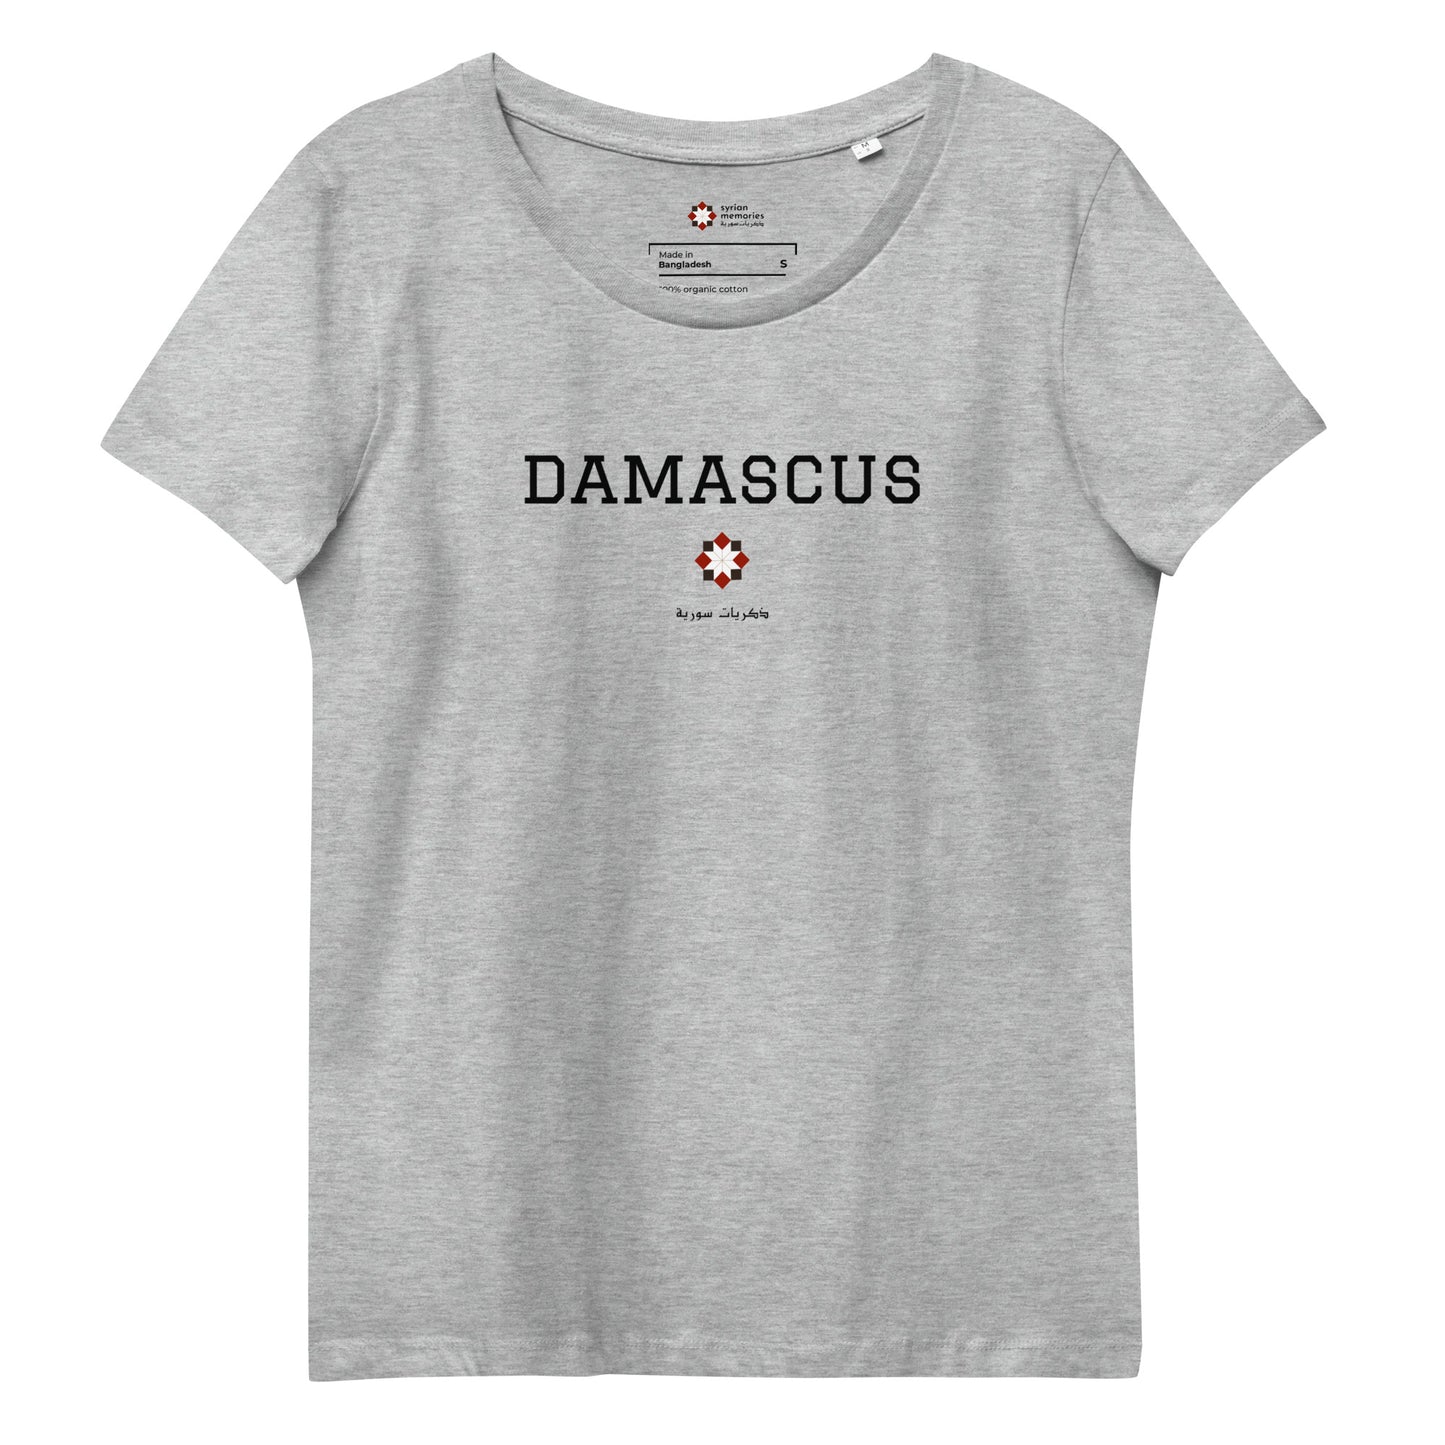 Damascus - University Collection - Women's Fitted Eco Tee